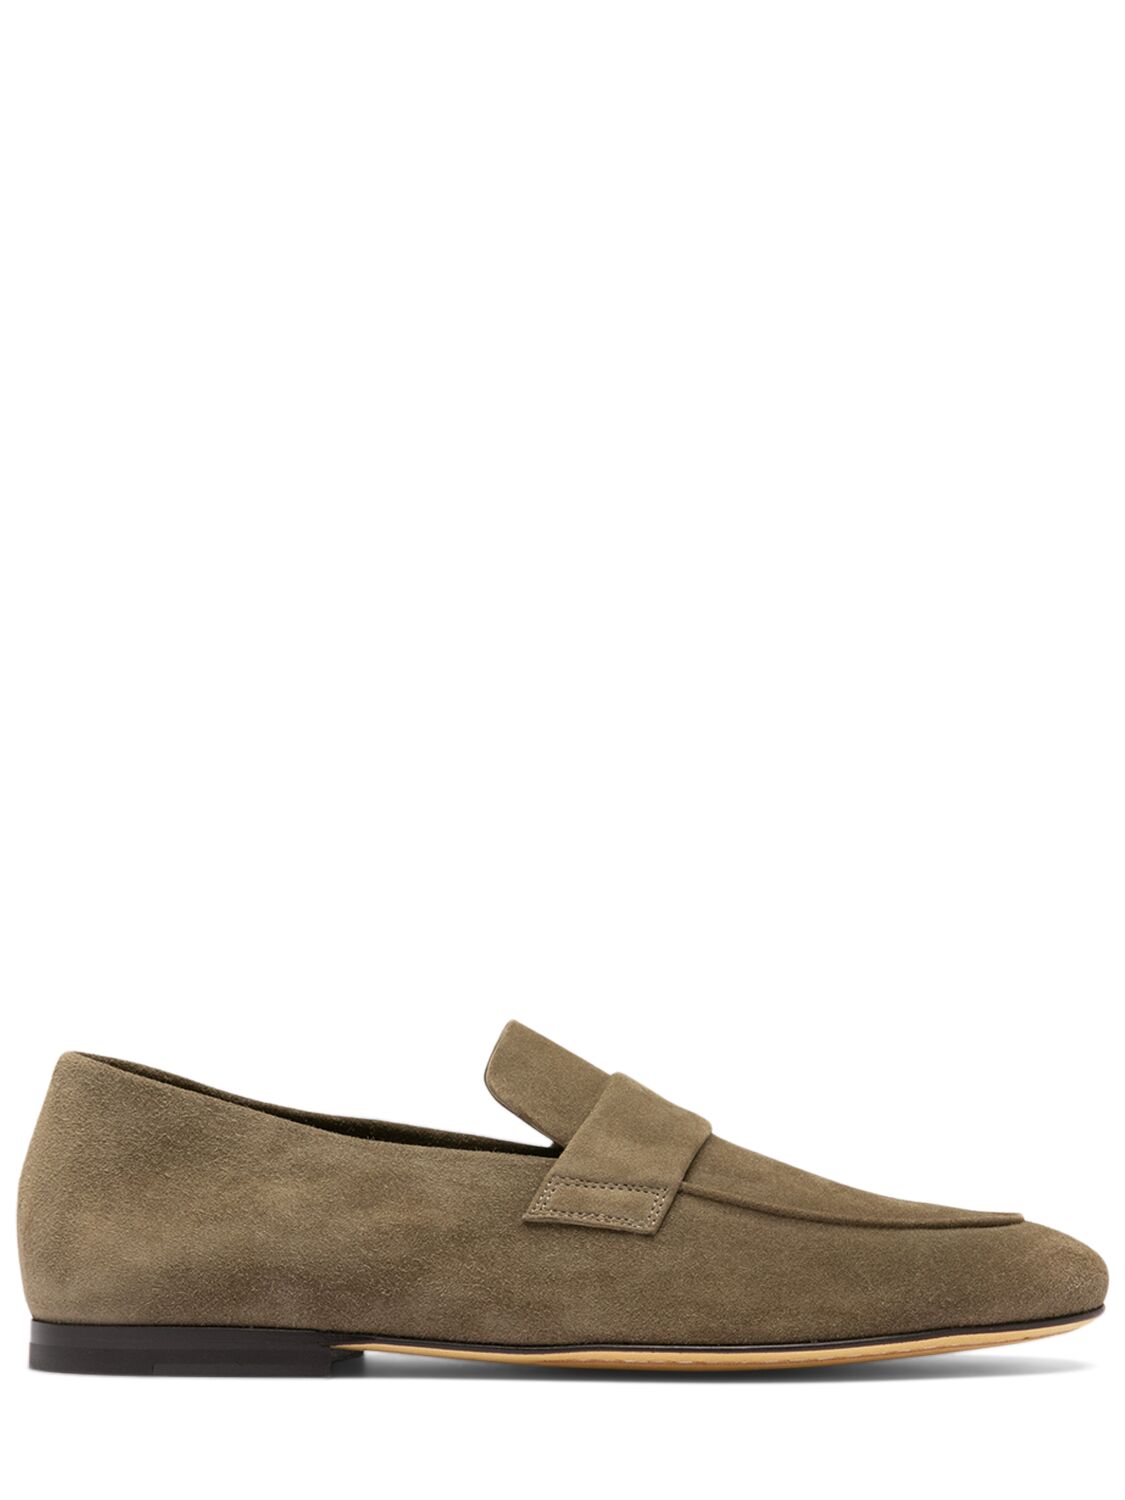 Image of Airto Suede Leather Loafers